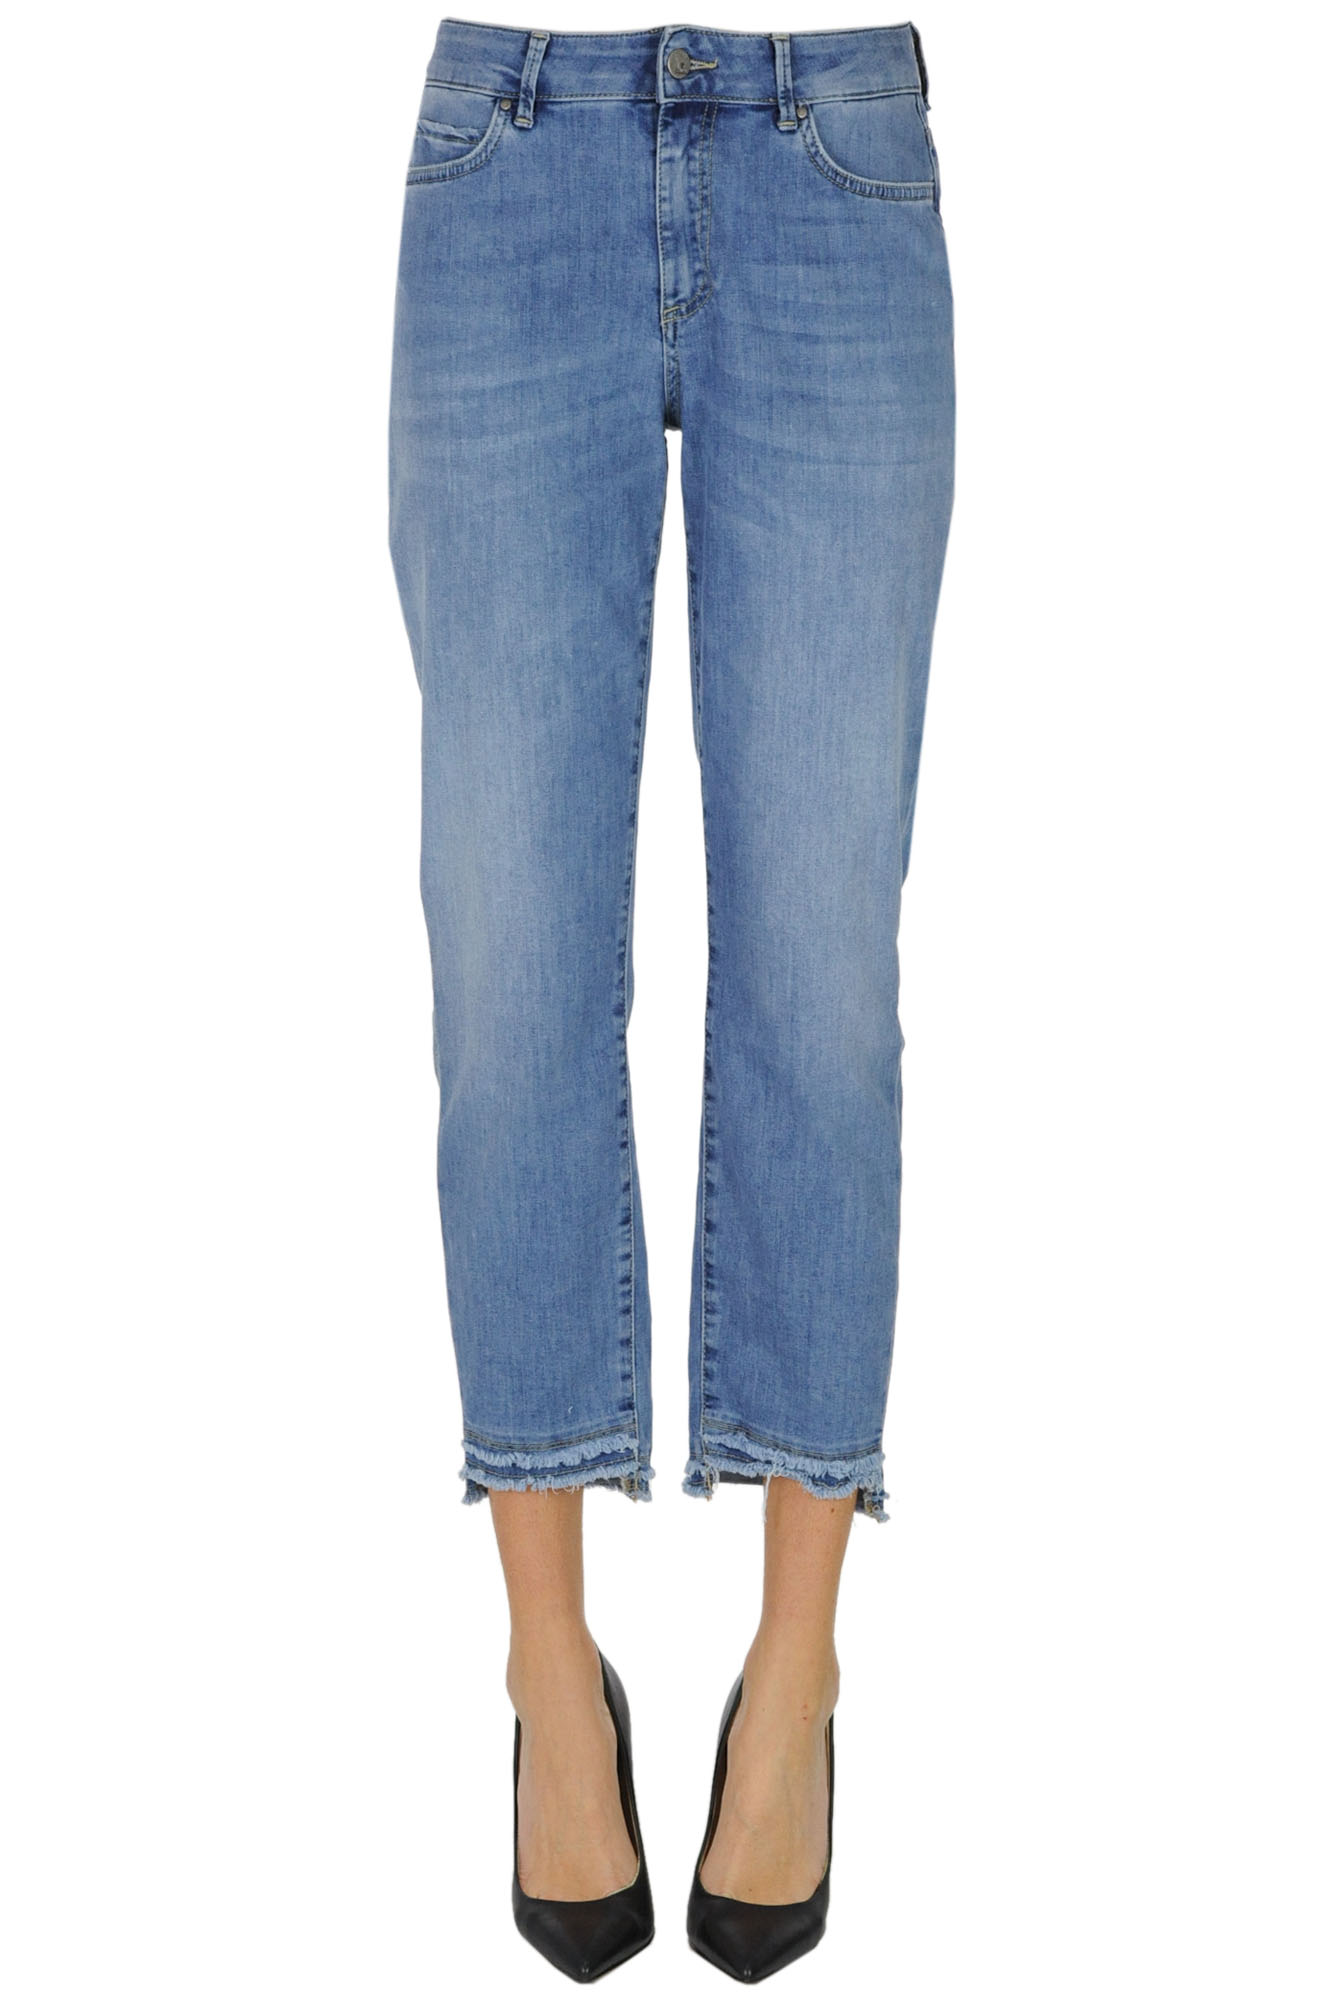 ATELIER CIGALA'S CROPPED JEANS